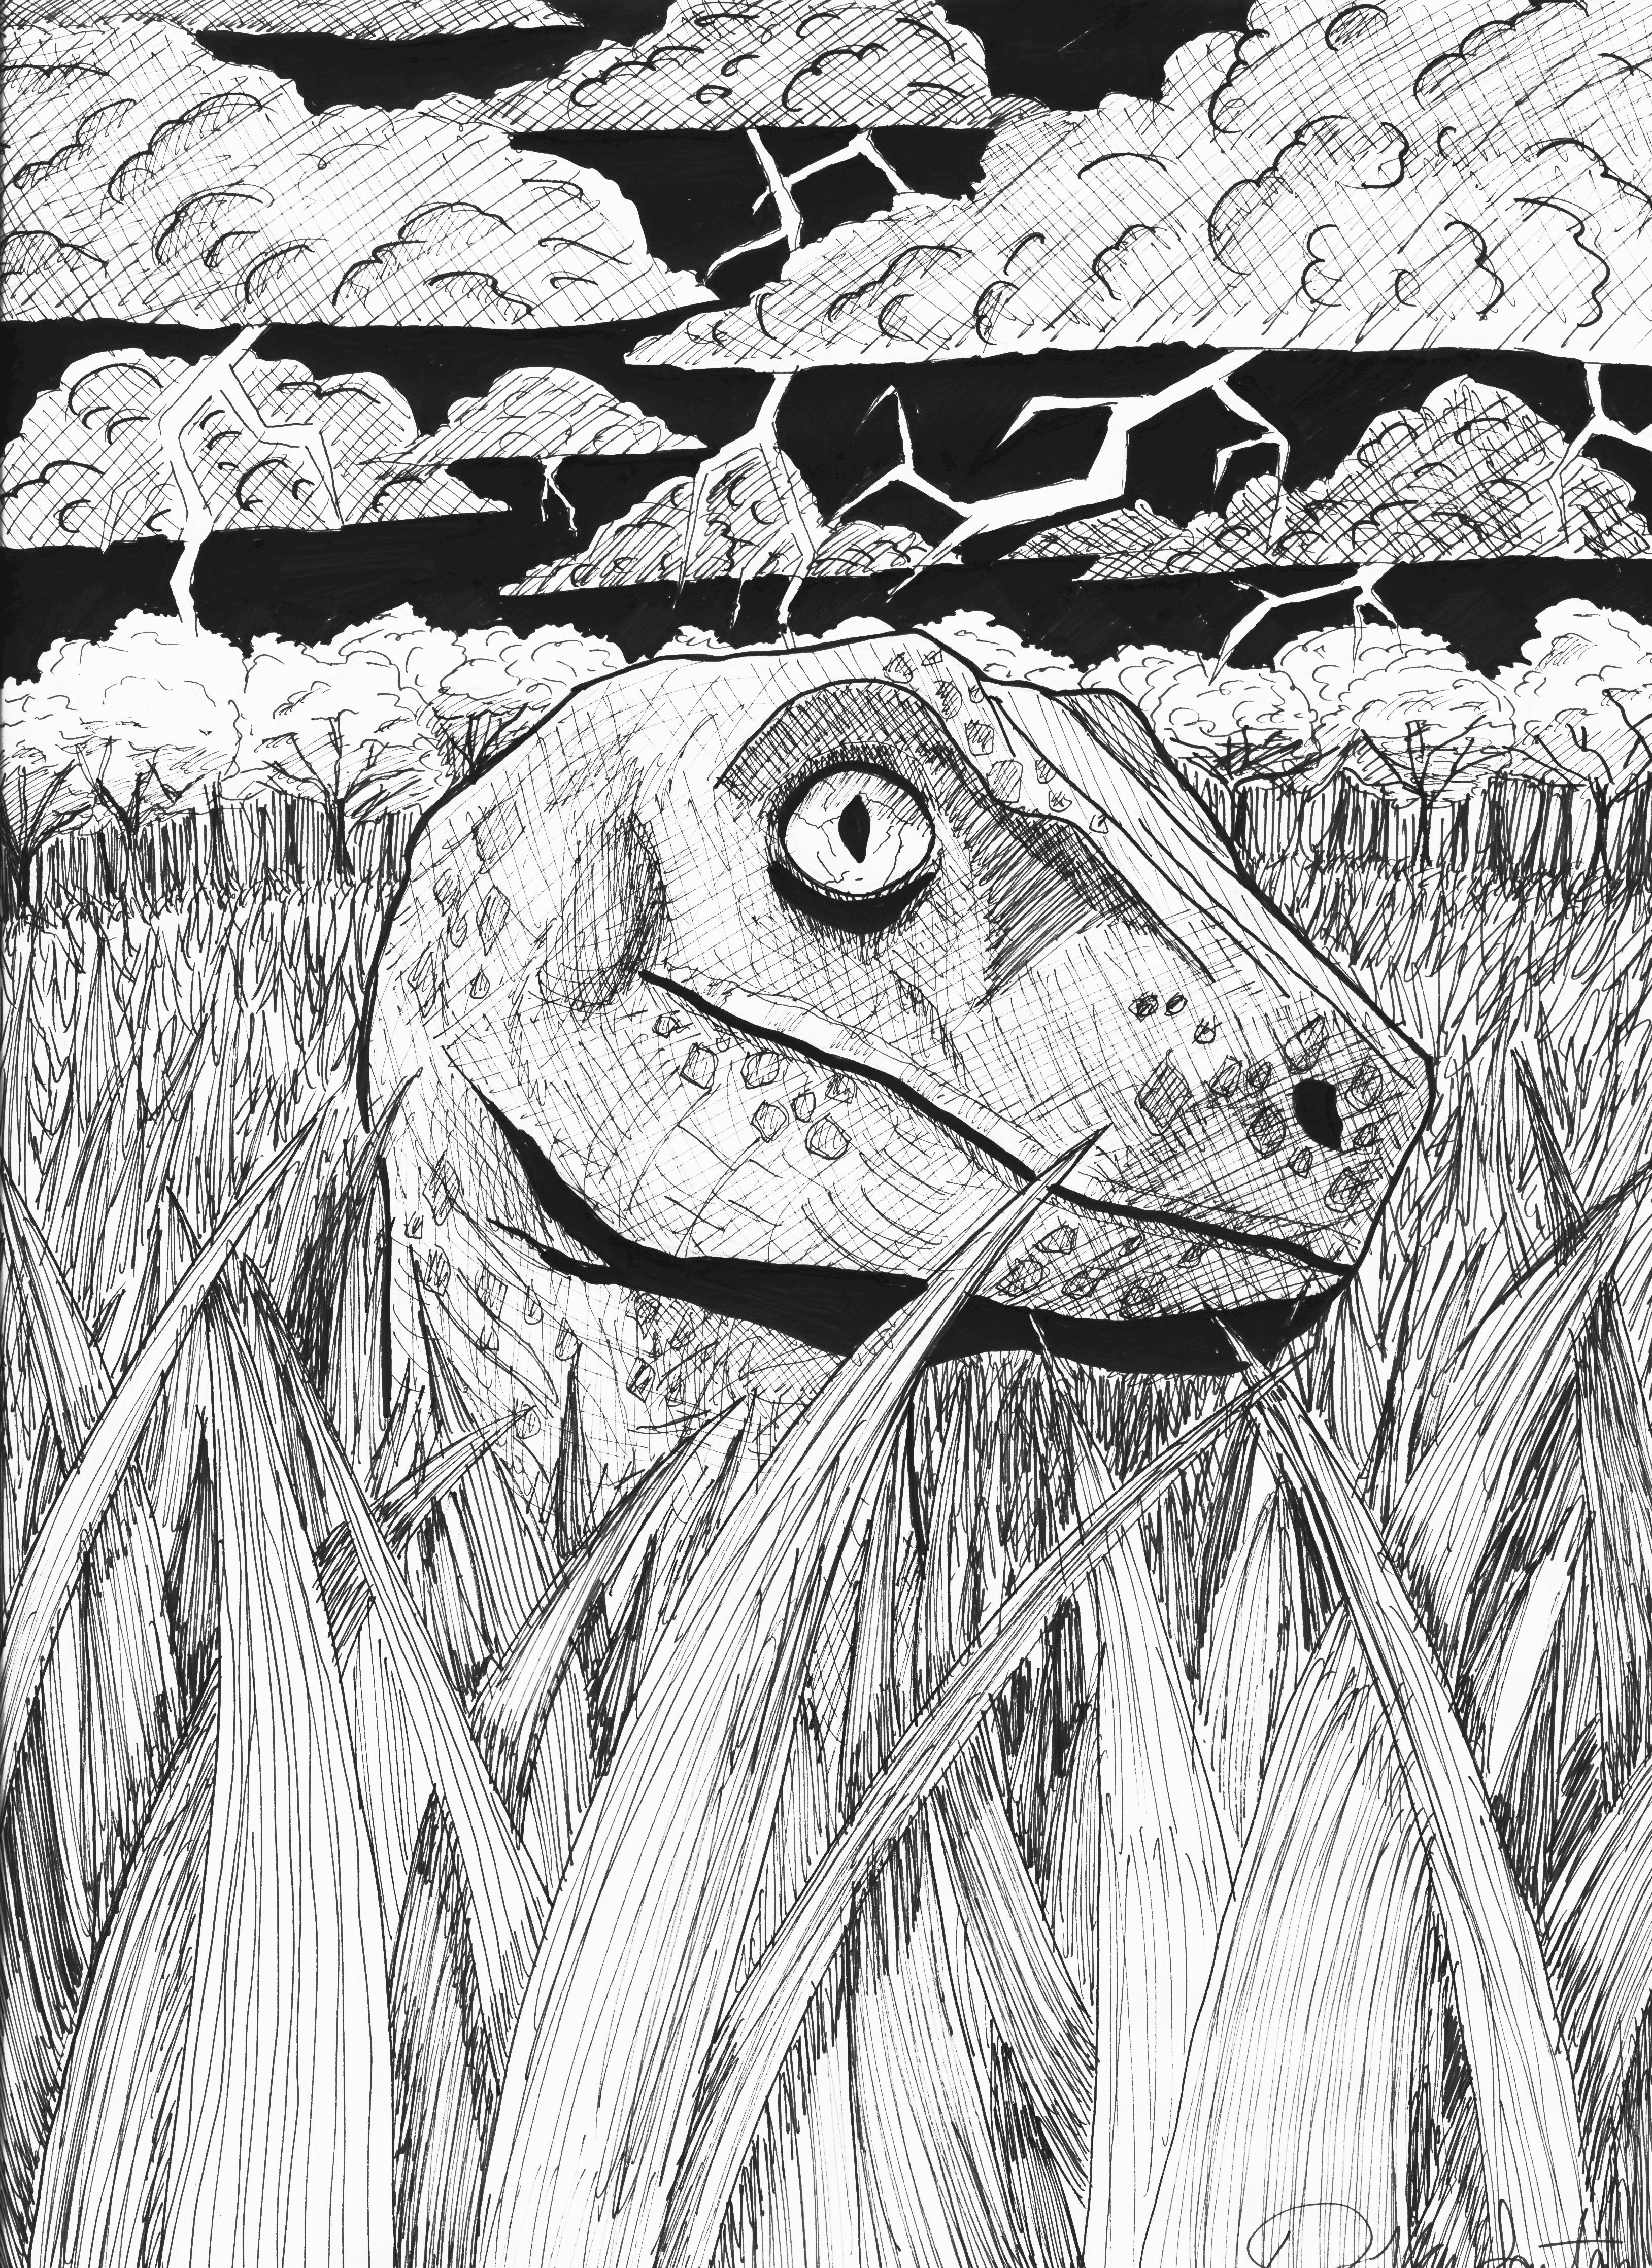 Art of the Month: Don’t Go Into The Tall Grass by Danyka Van Santen